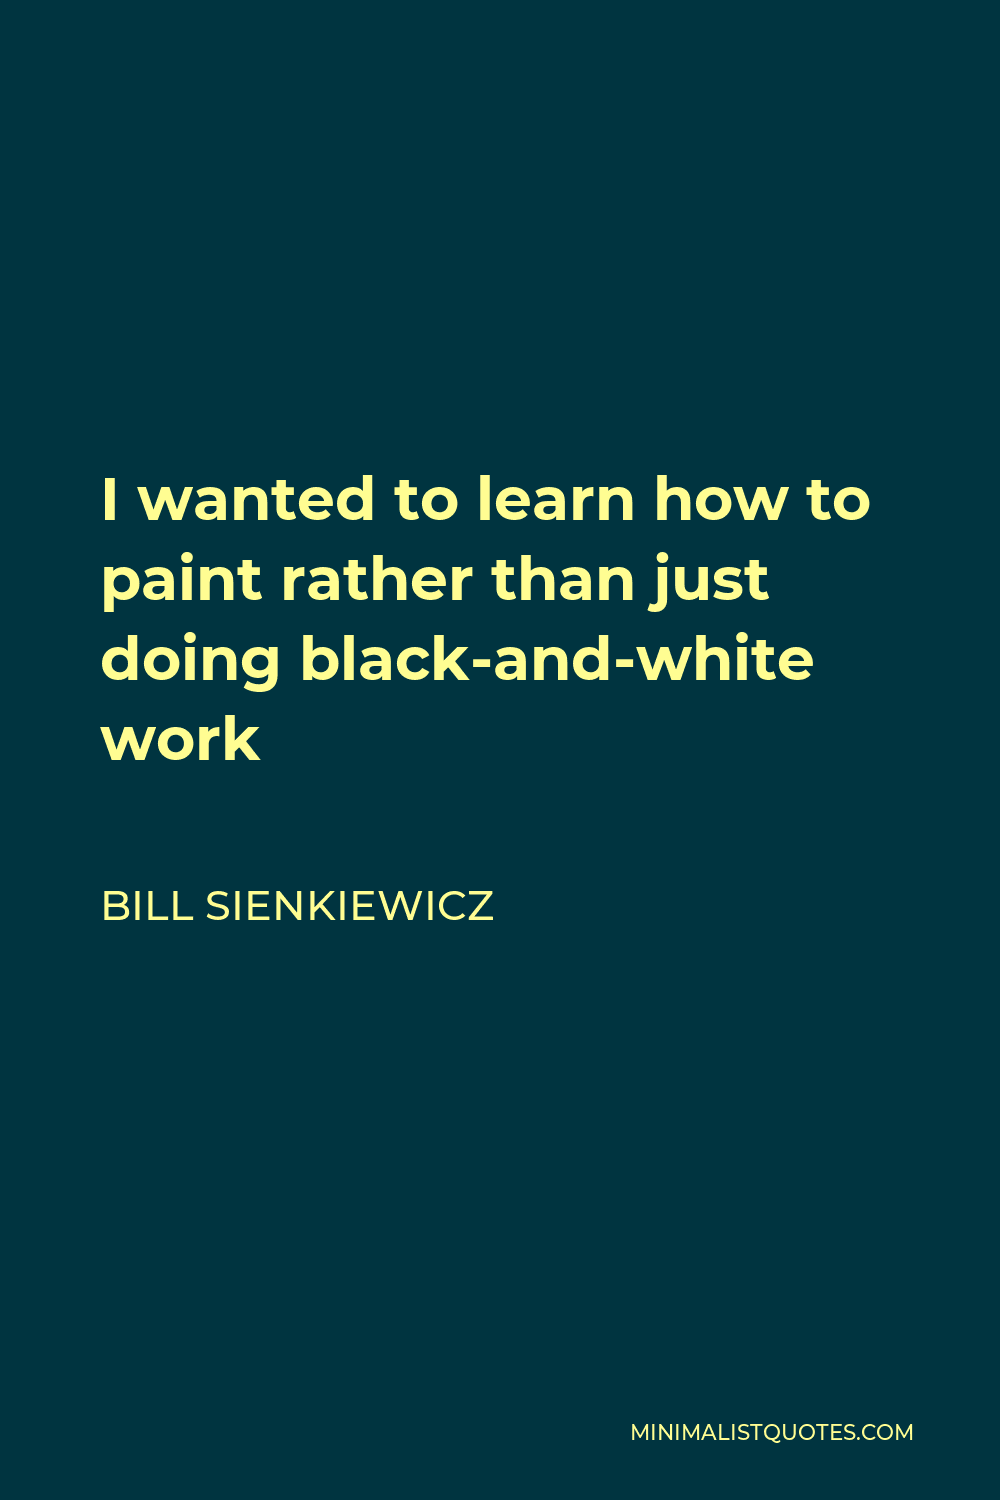 Bill Sienkiewicz Quote - I wanted to learn how to paint rather than just doing black-and-white work